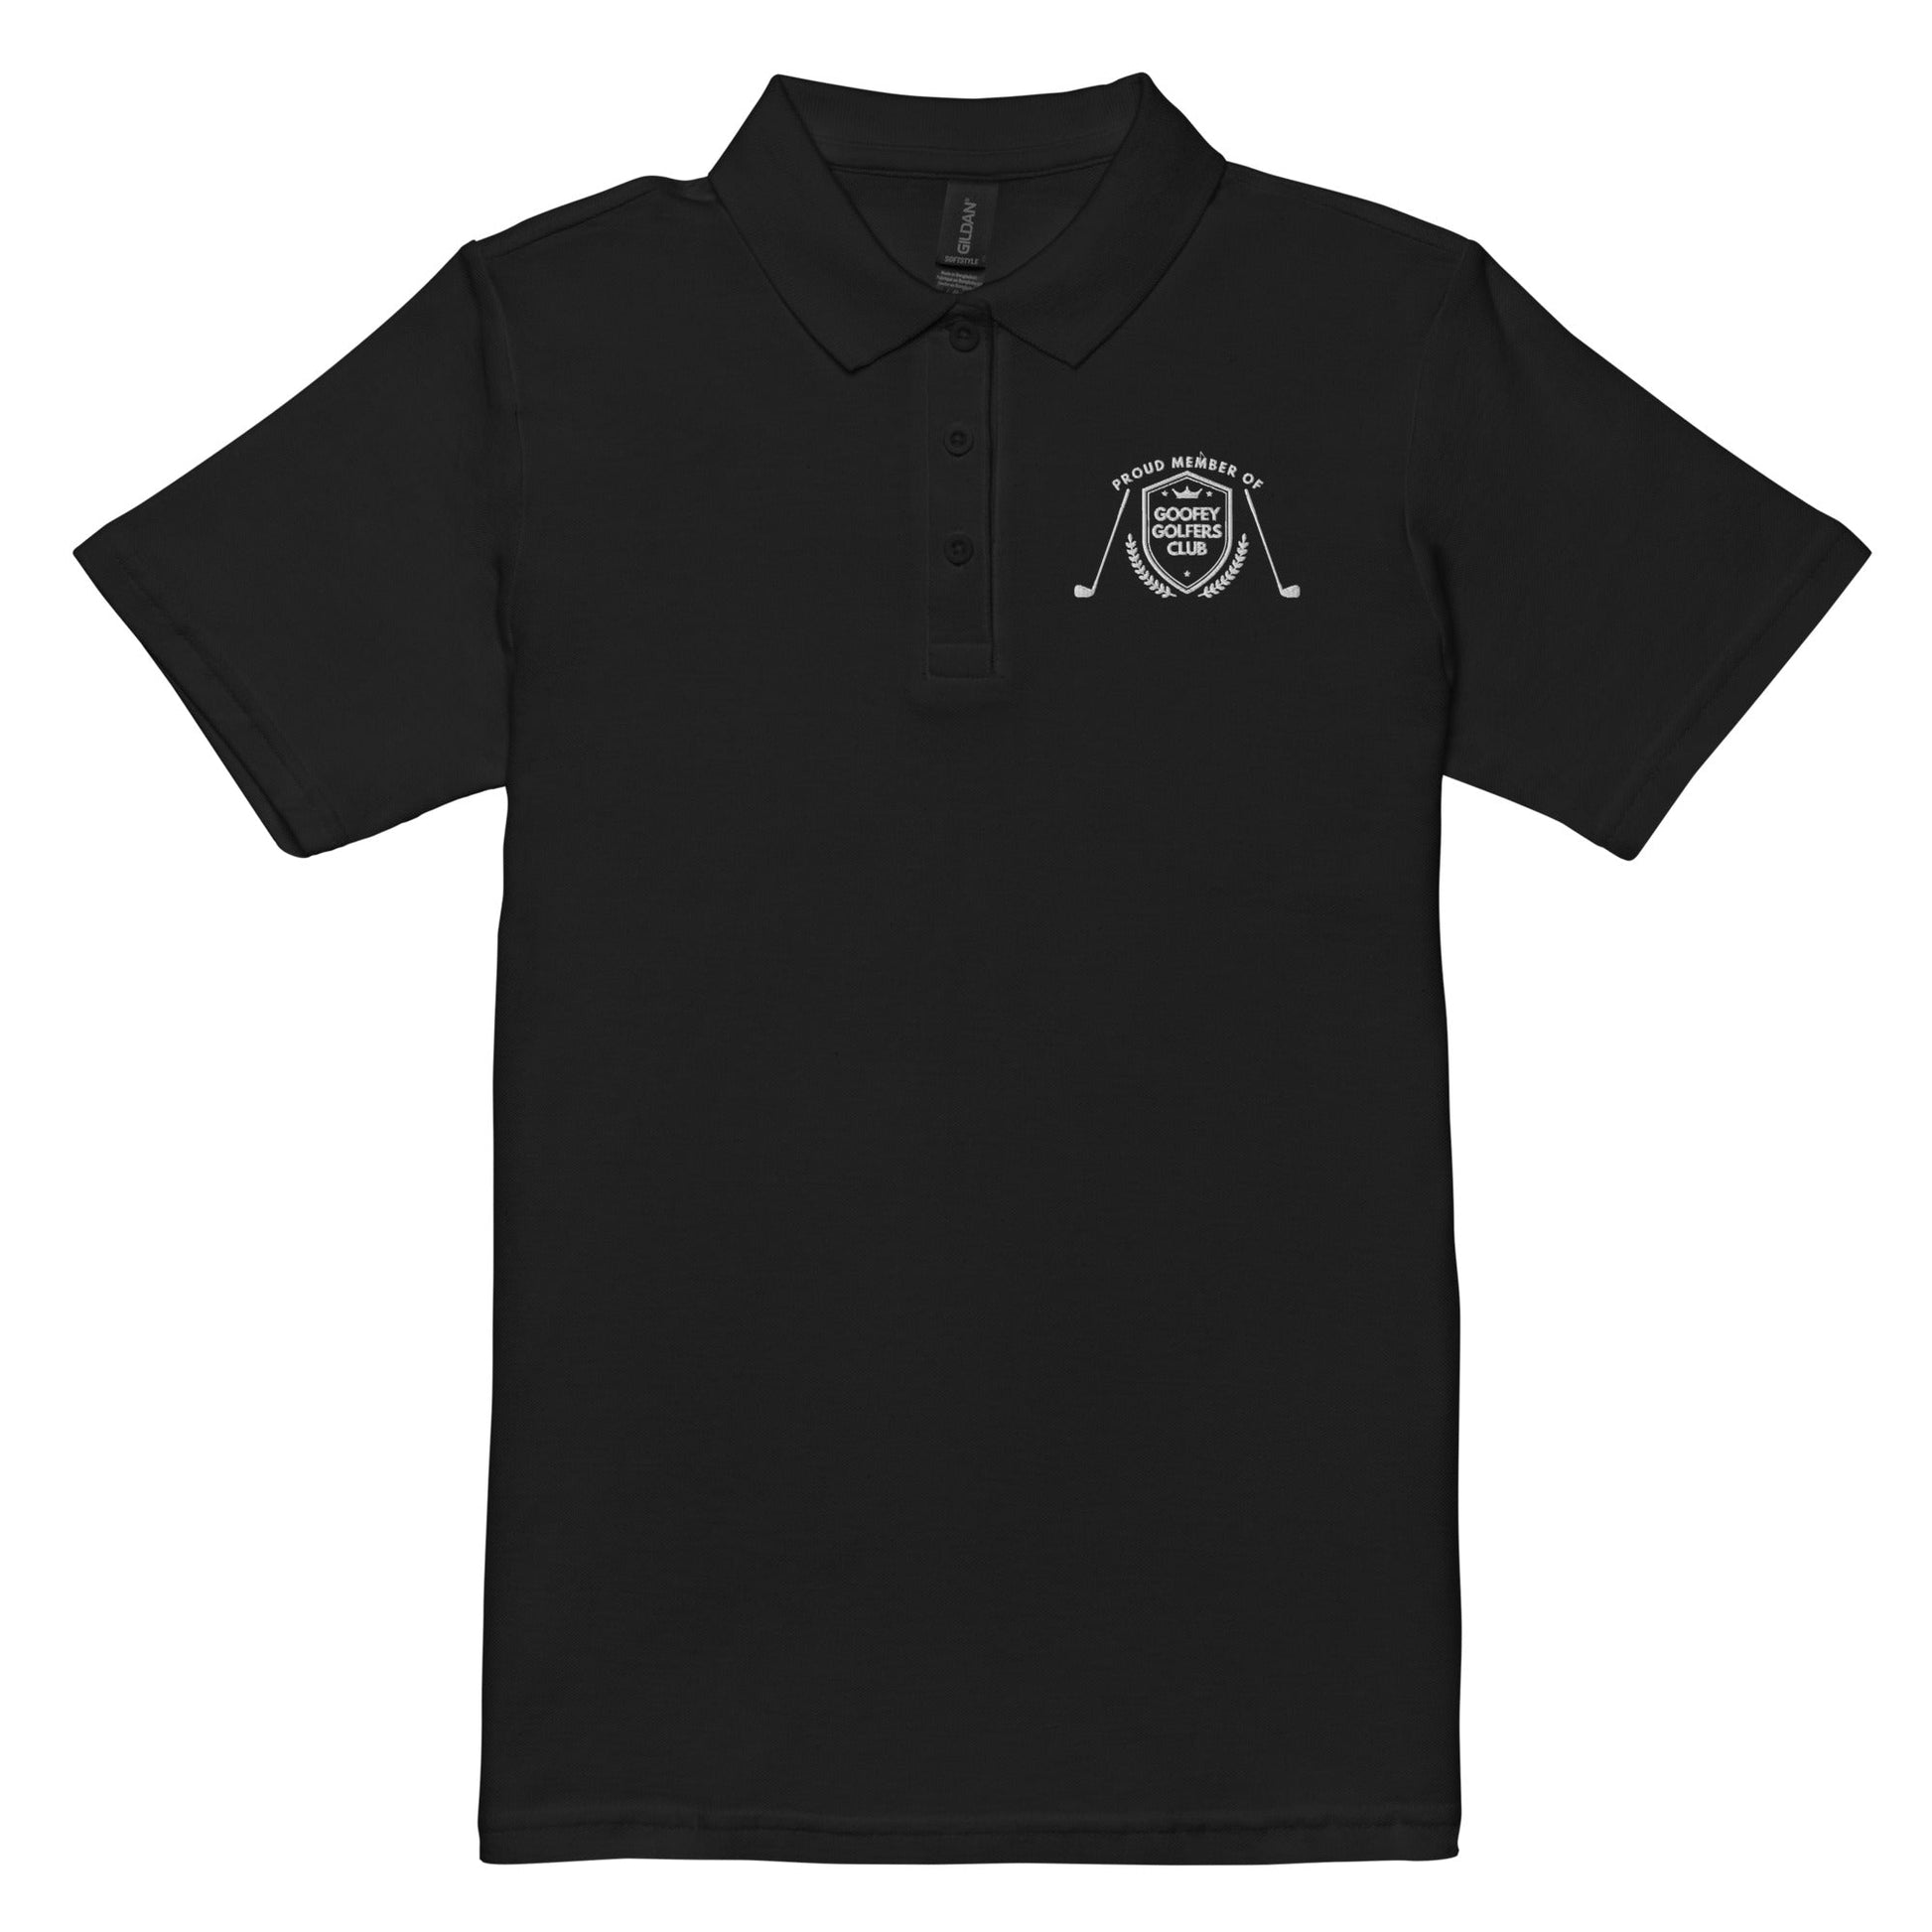 Funny Golfer Gifts  Womens Polo Black / S Proud Member of the Goofey Golfers Club Women’s Pique Polo Shirt